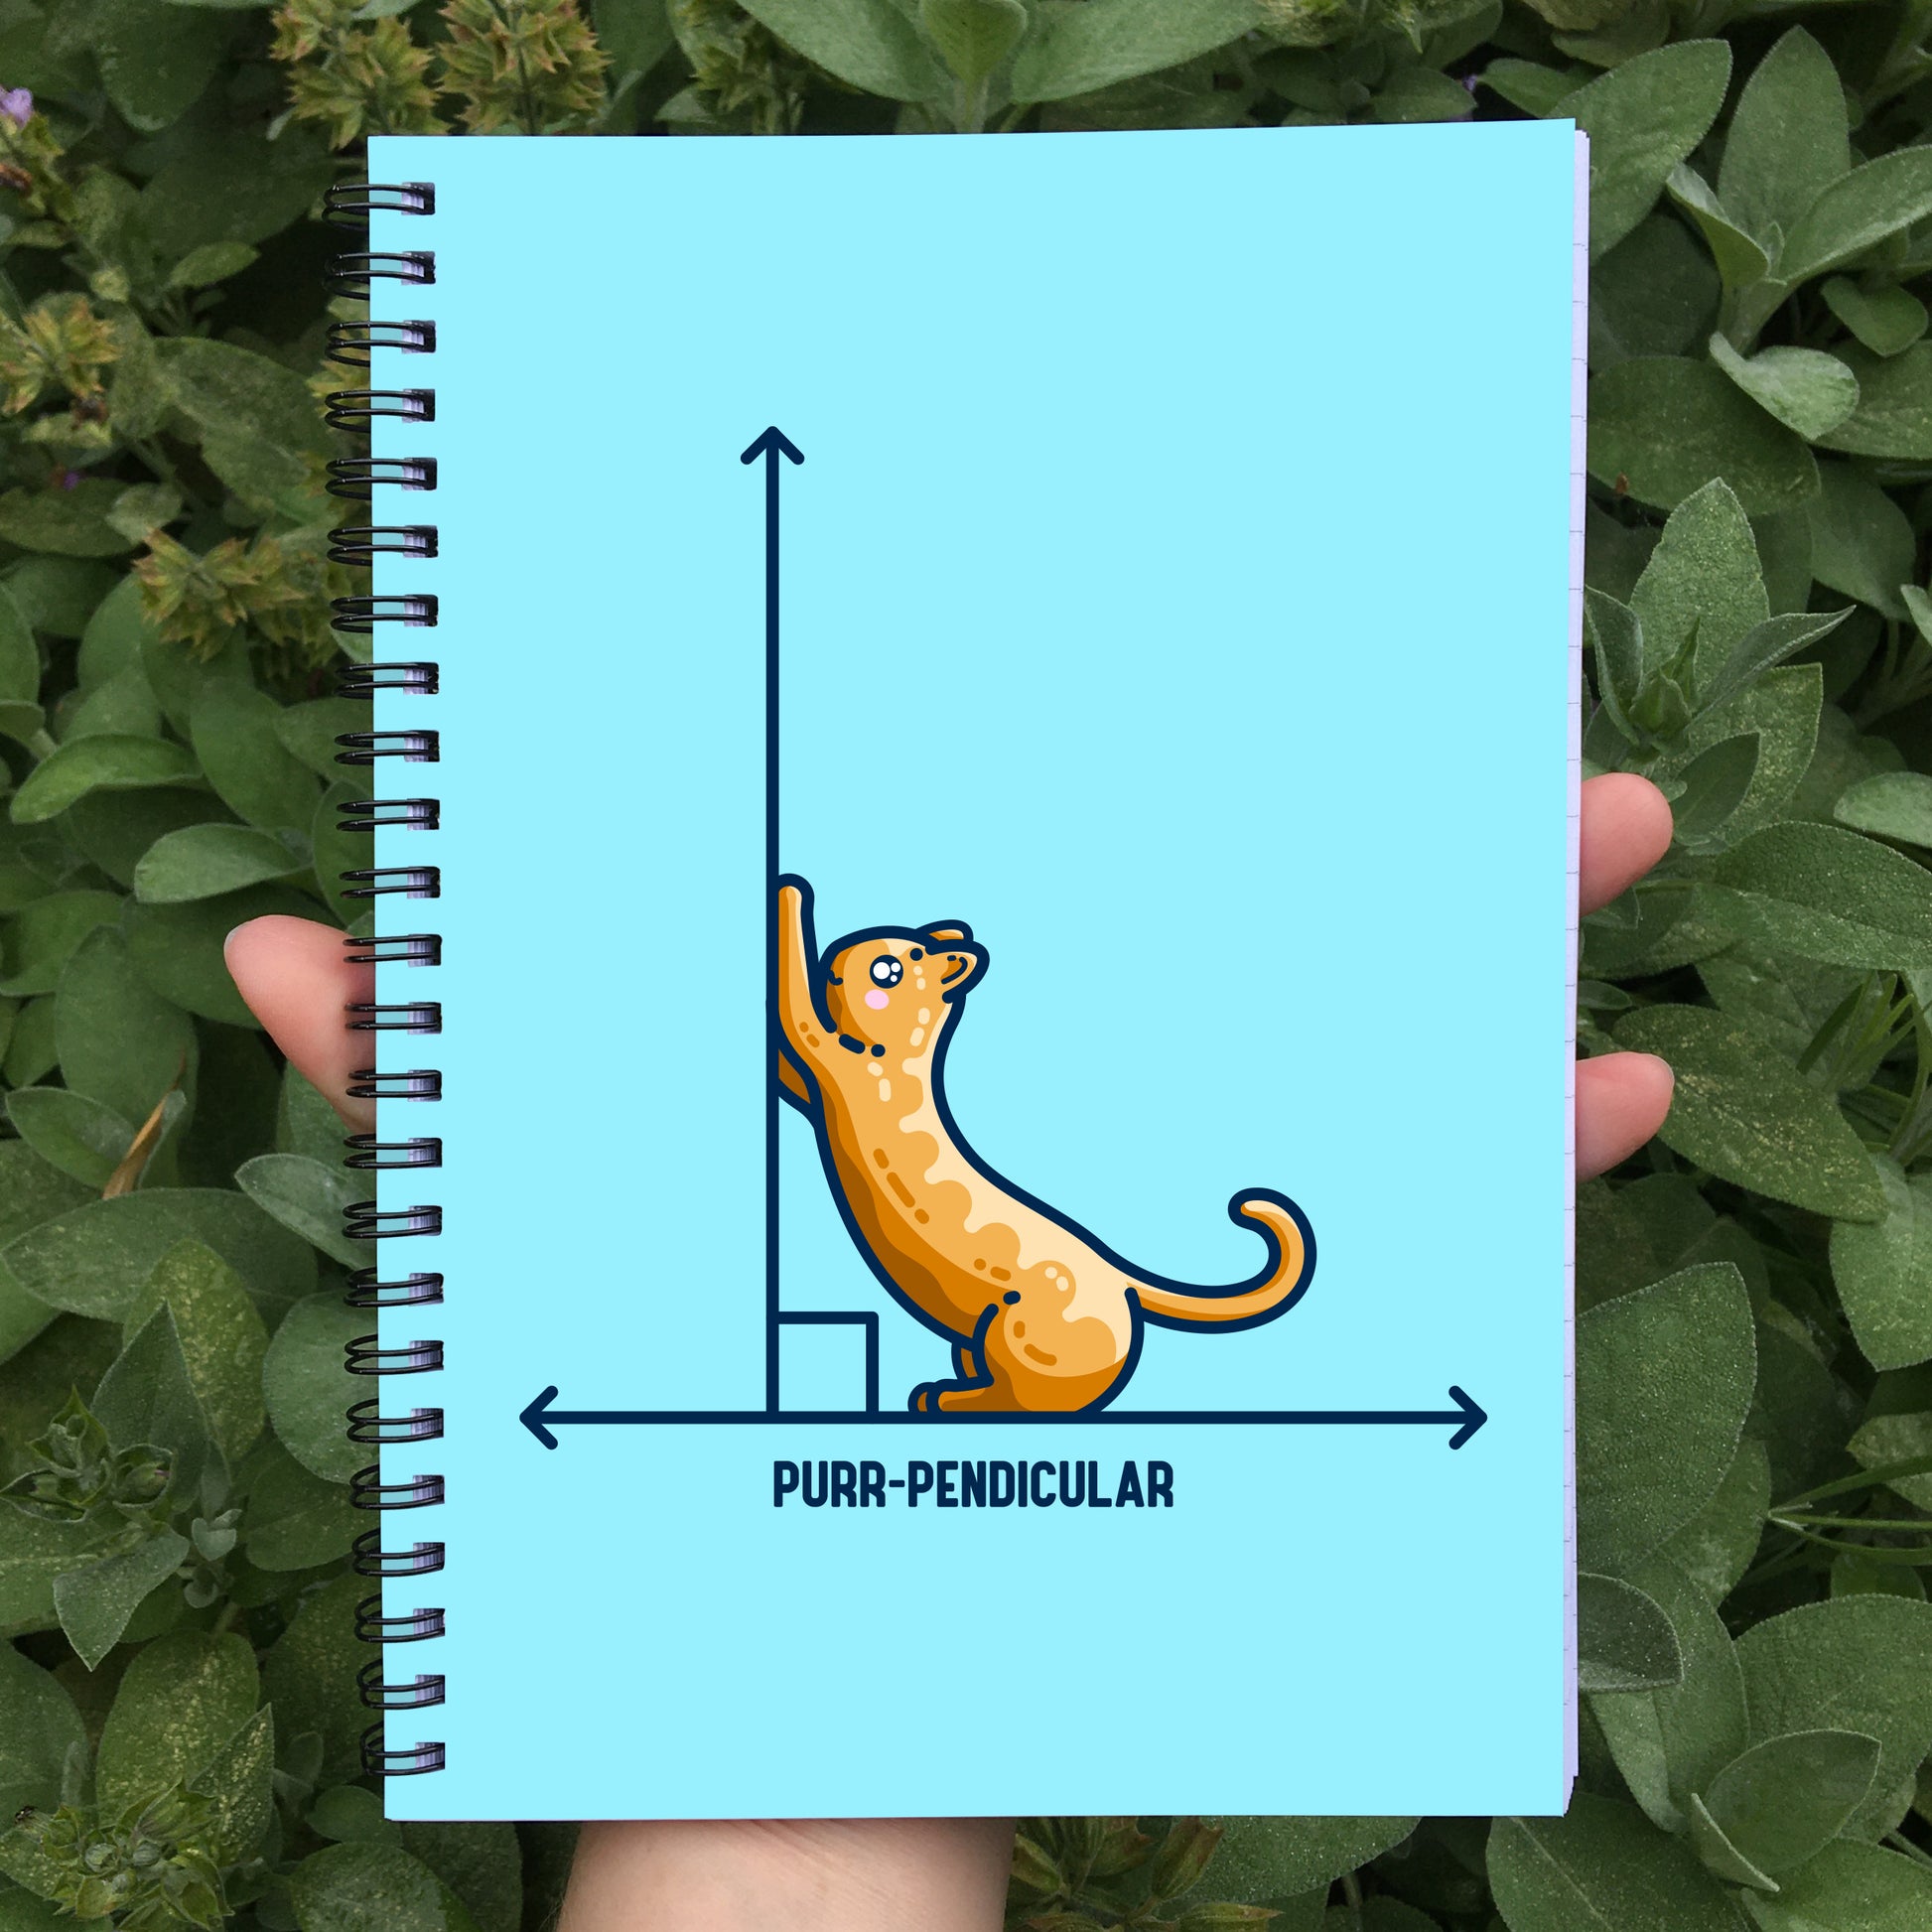 A turqoise coloured spiral notebook held in a hand showing the front cover. Features a design of a horizontal line intersected by a vertical line at a right angle. A cute ginger cat on the horizontal line is using the vertical line as a scratching post. The word purr-pendicular is written in capital letters beneath.